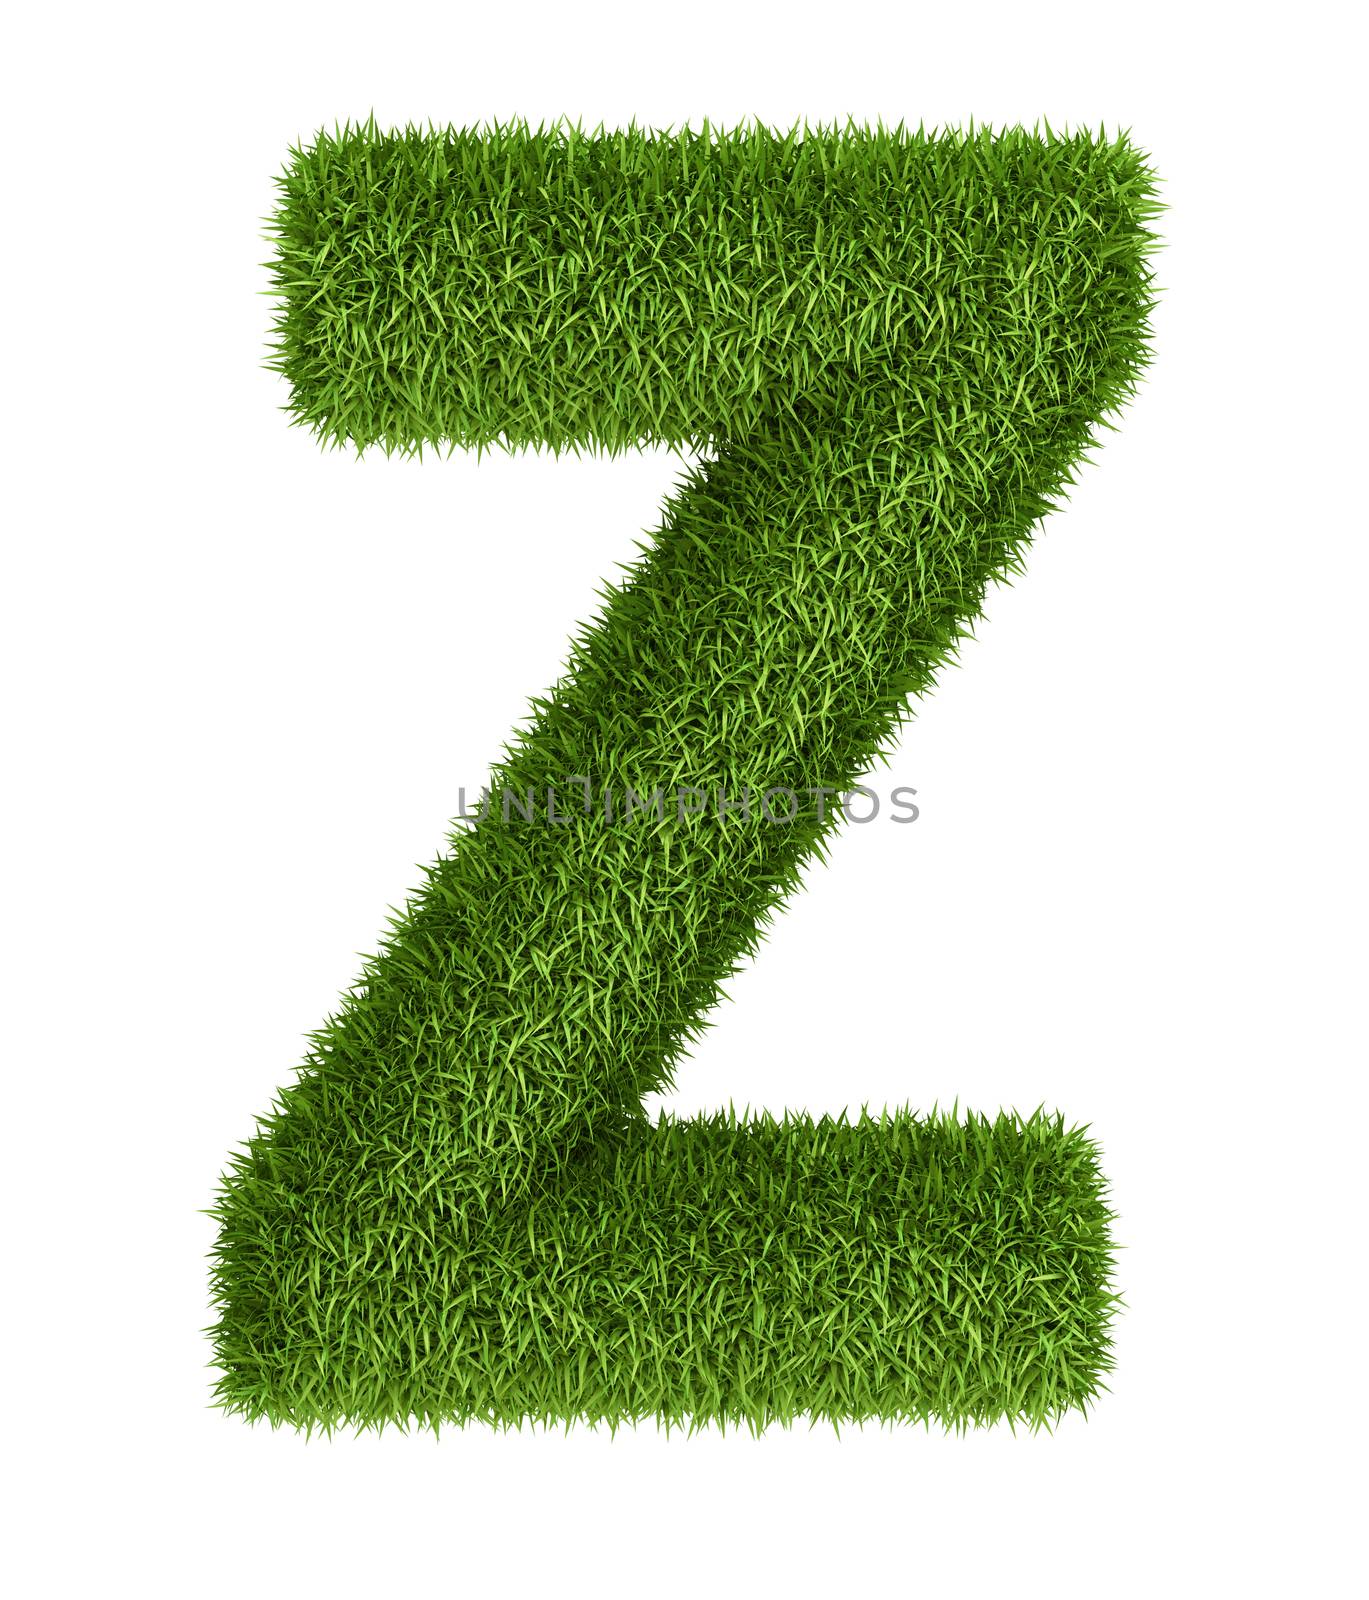 Letter Z  isolated photo realistic grass ecology theme on white